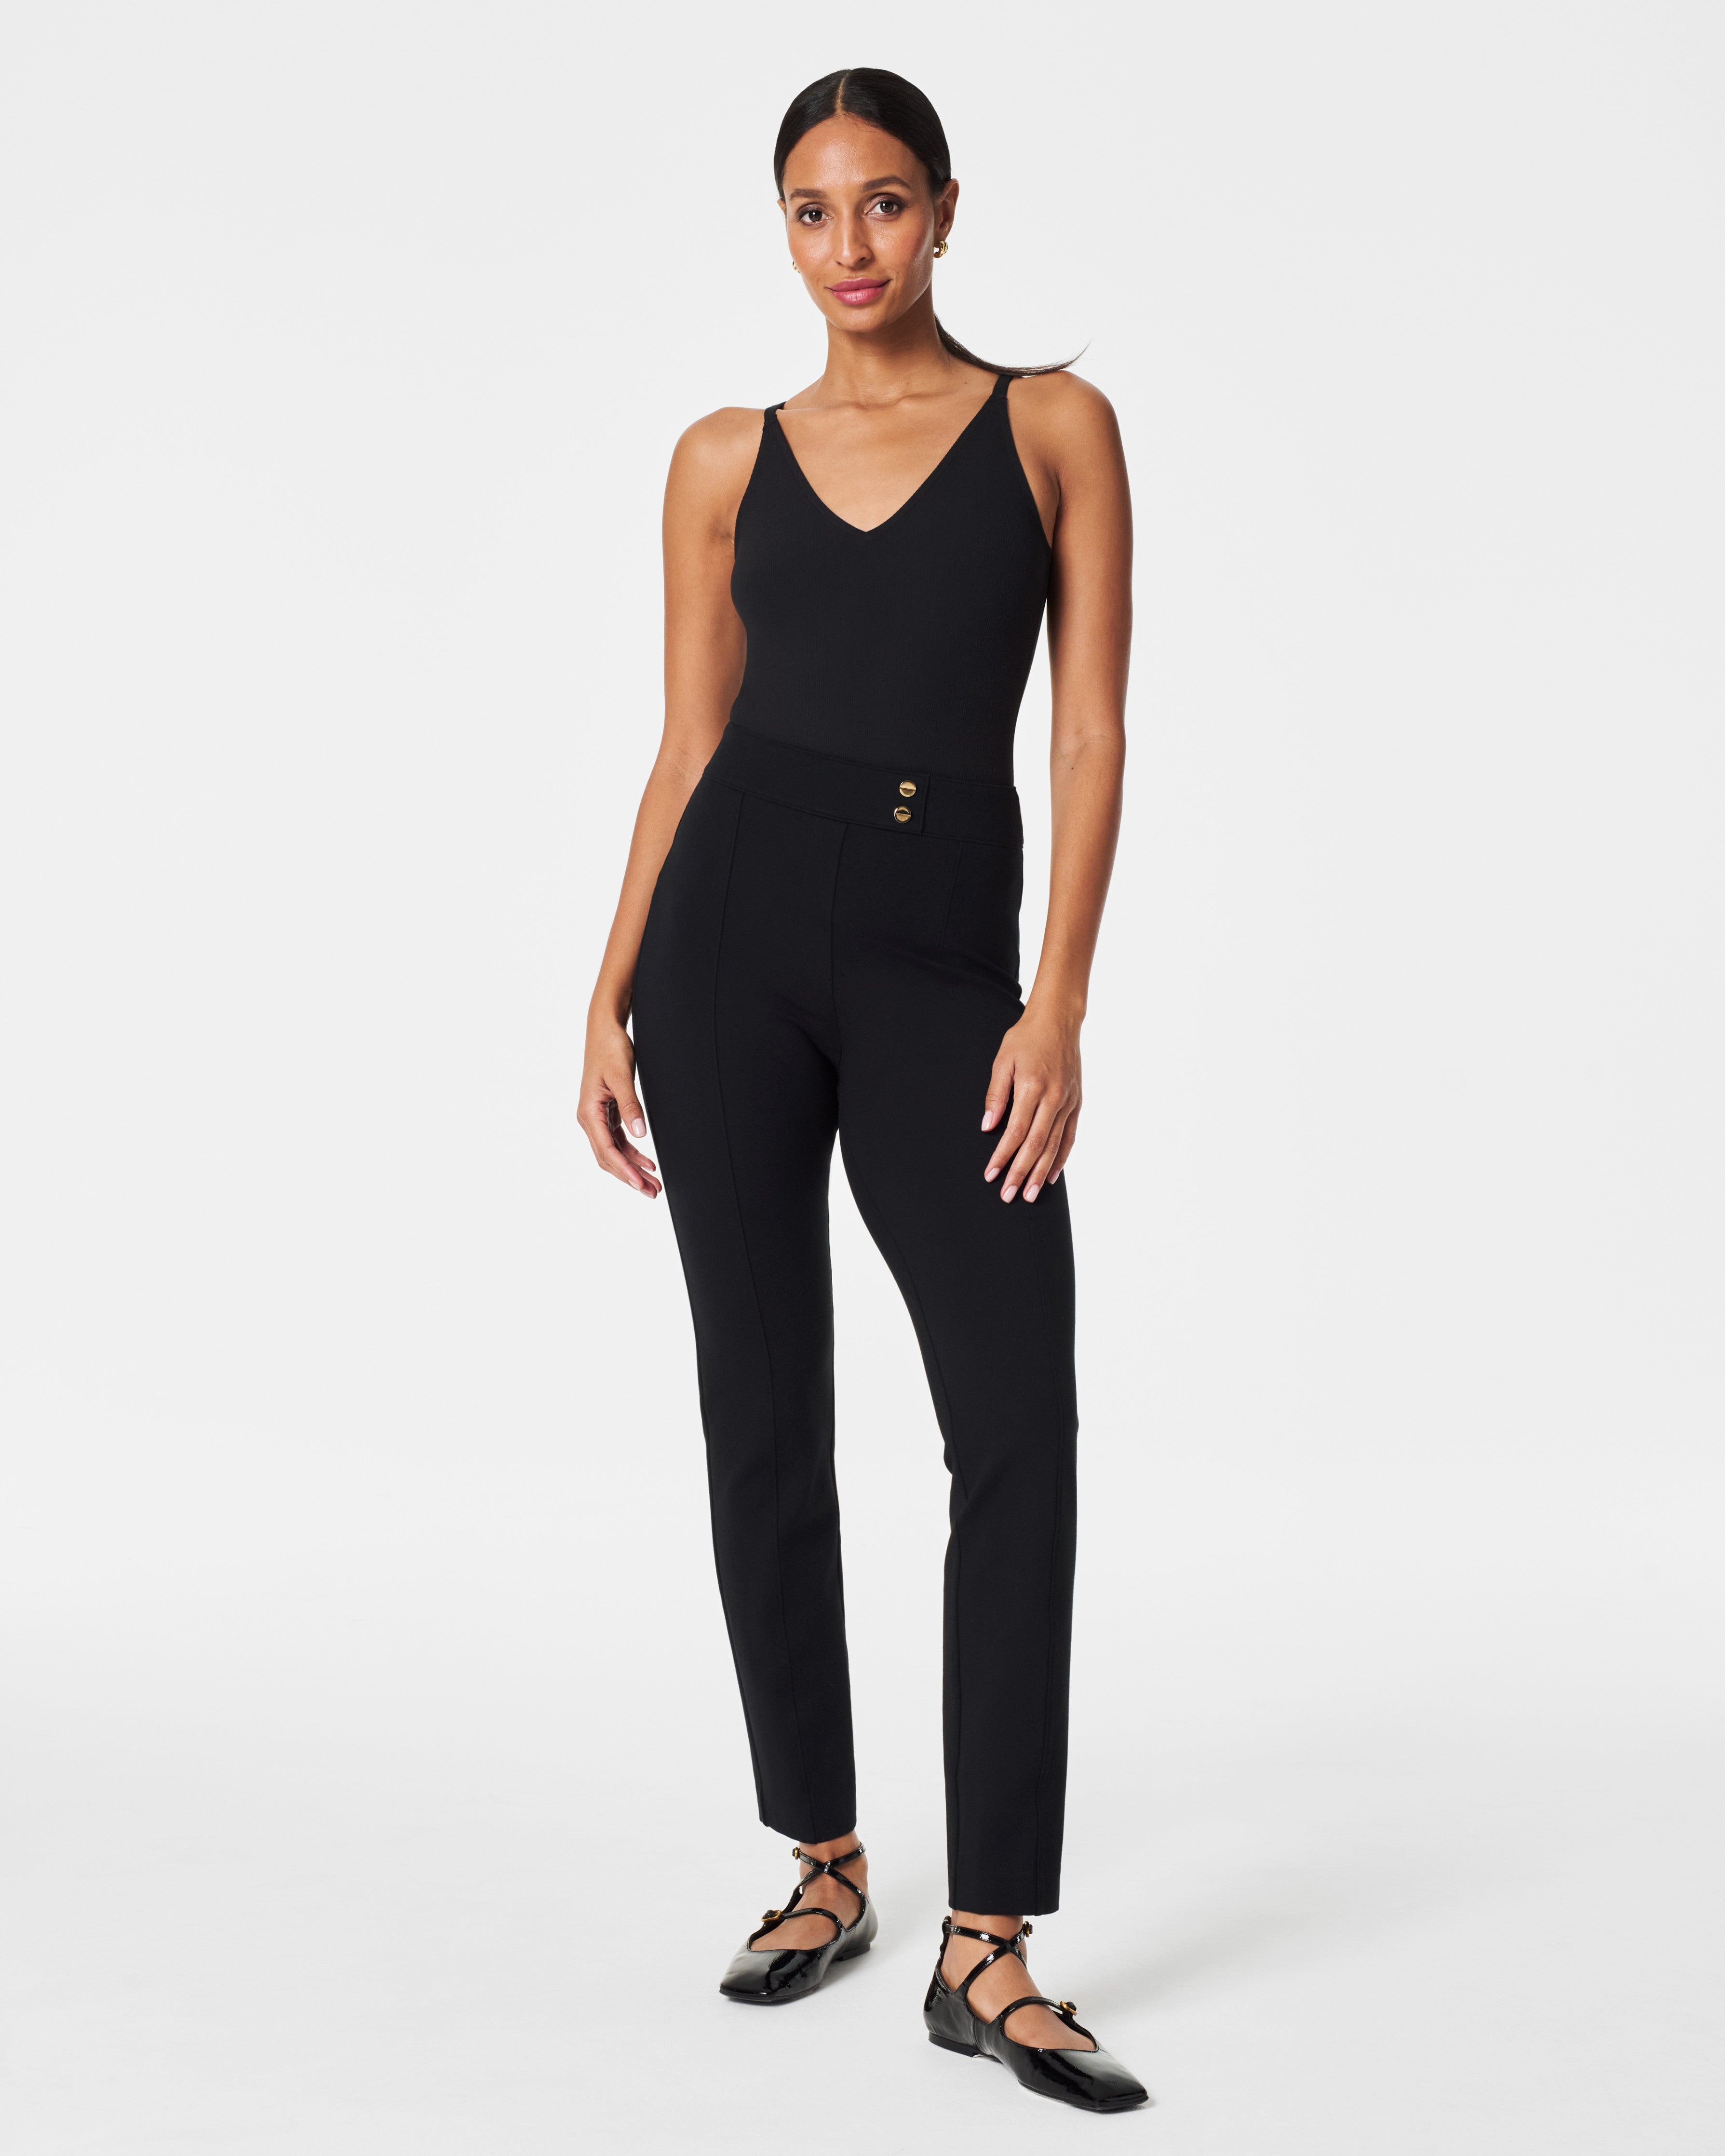 Suit Yourself Racer Ribbed Bodysuit – Spanx